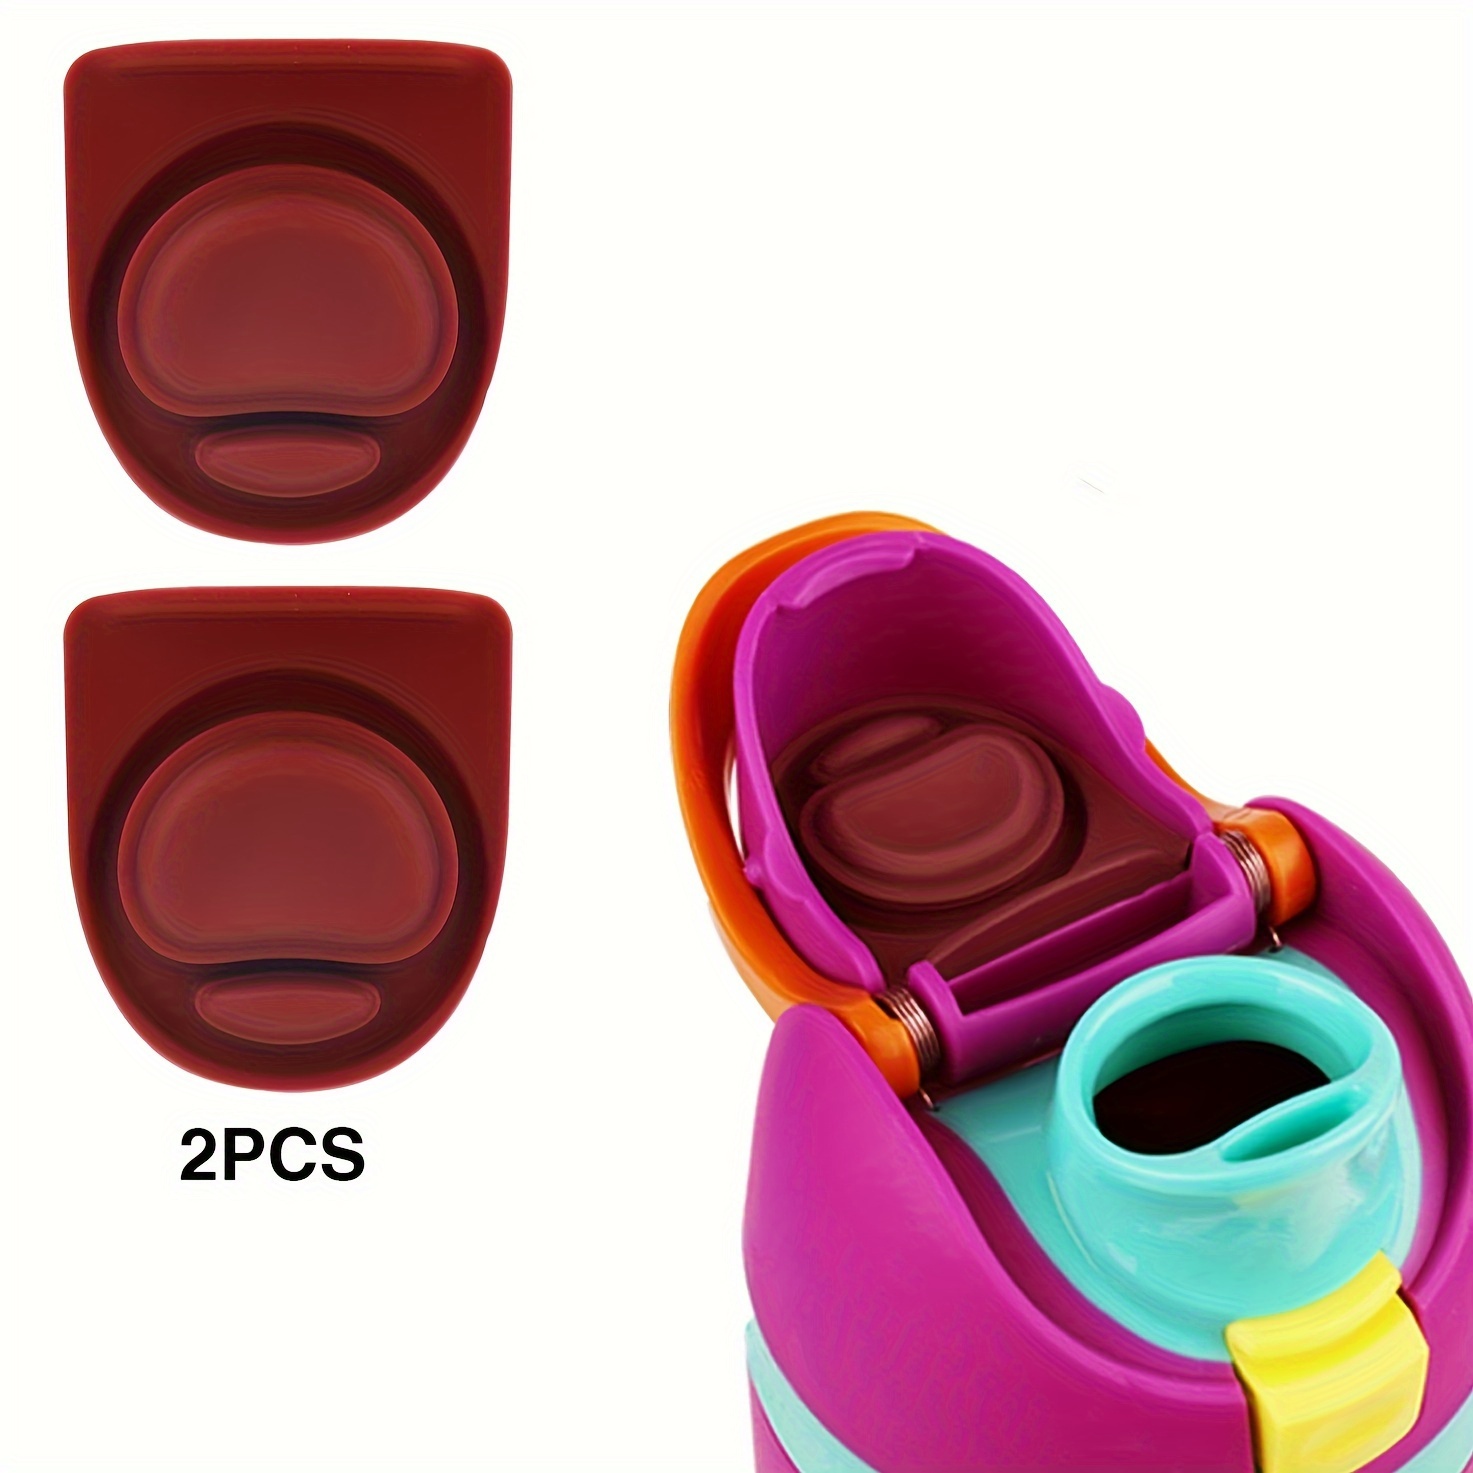 4PCS Water Bottle Replacement Cup Seal Gaskets Silicone Top Cover